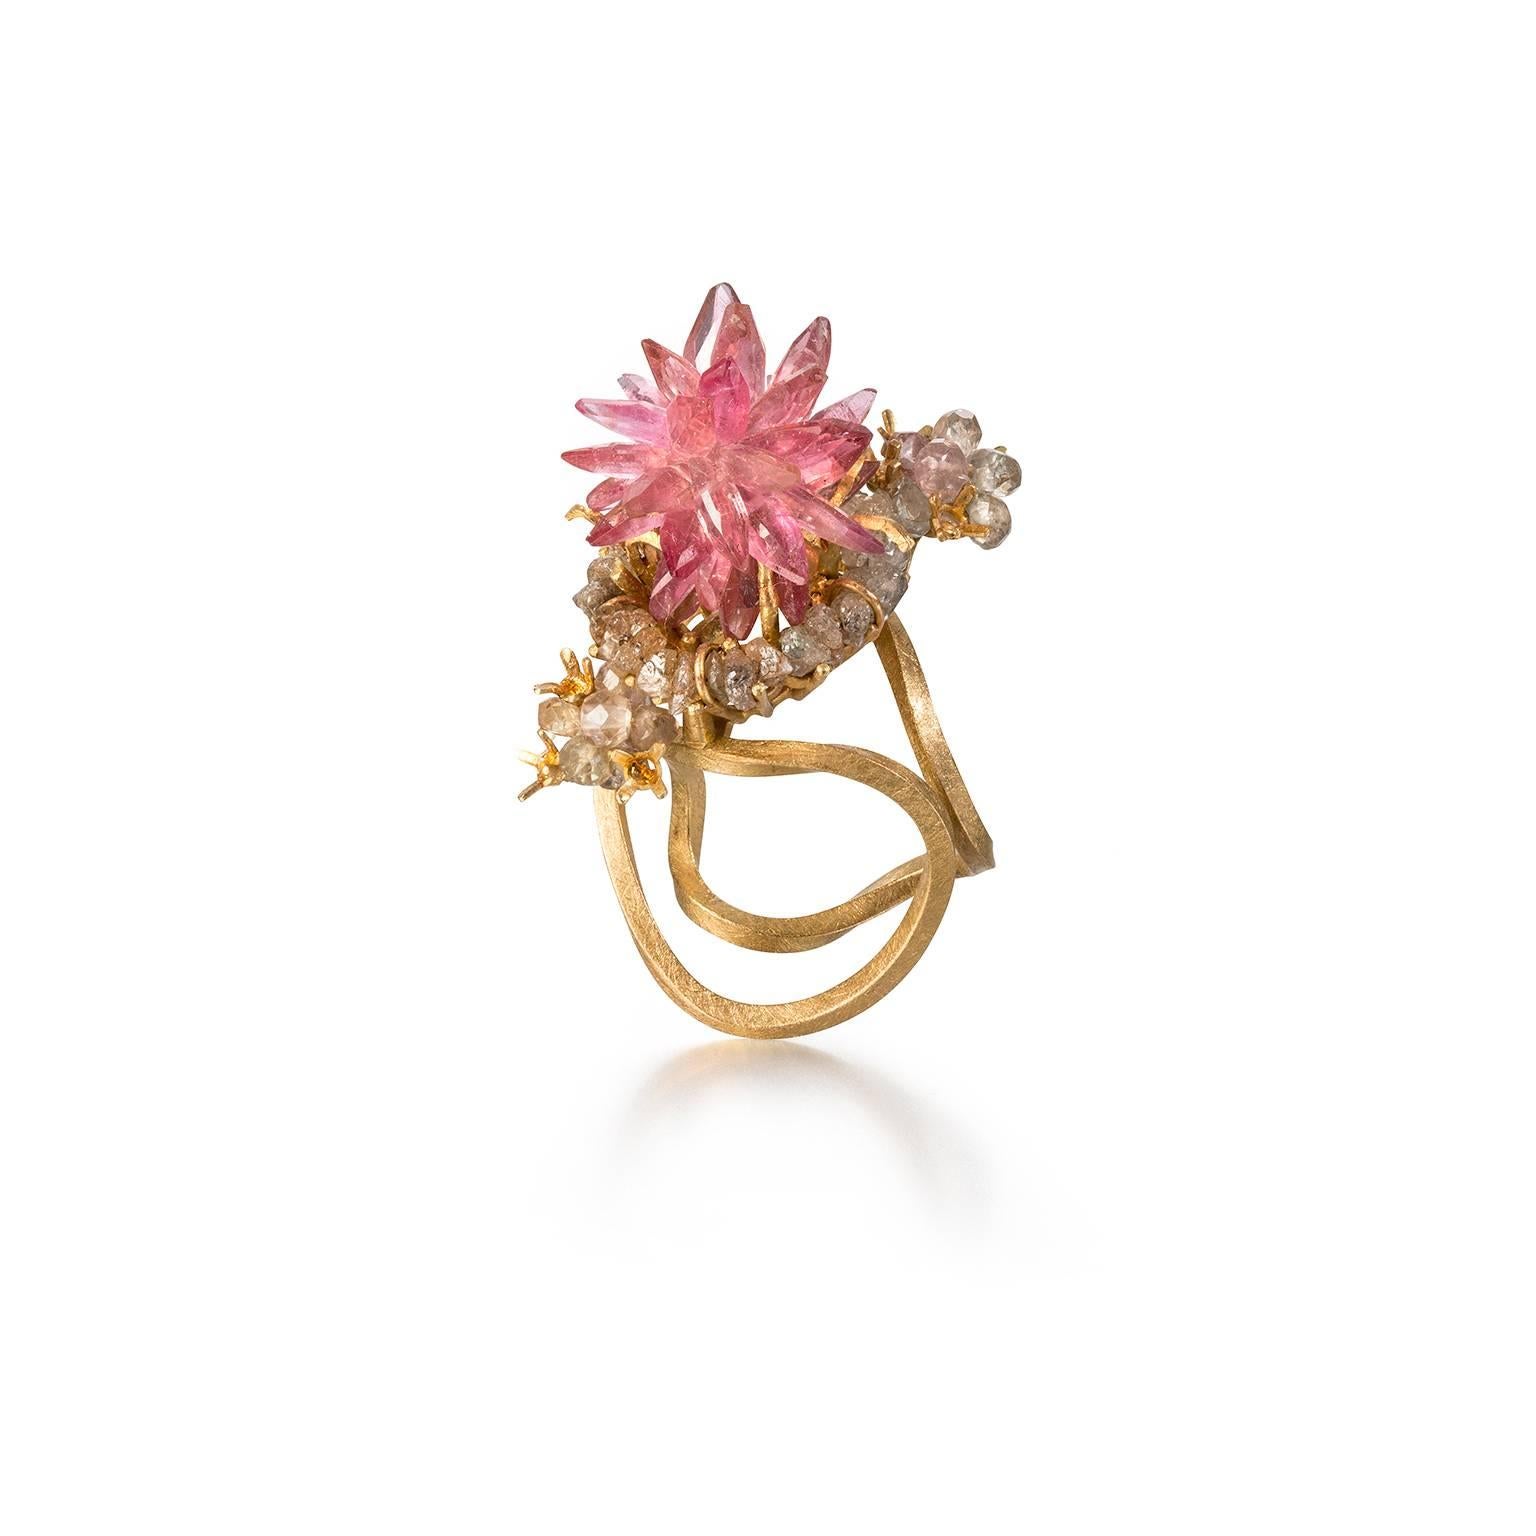 Unique sculptural 18t Gold Cocktail Ring by Donna Brennan. Featuring a star burst of Pink Tourmalines delicately framed by a ring of cognac Rough Diamonds and a cluster of champagne Sapphires. Double ring shank in approx. size 4.5 (size I 1/2), can